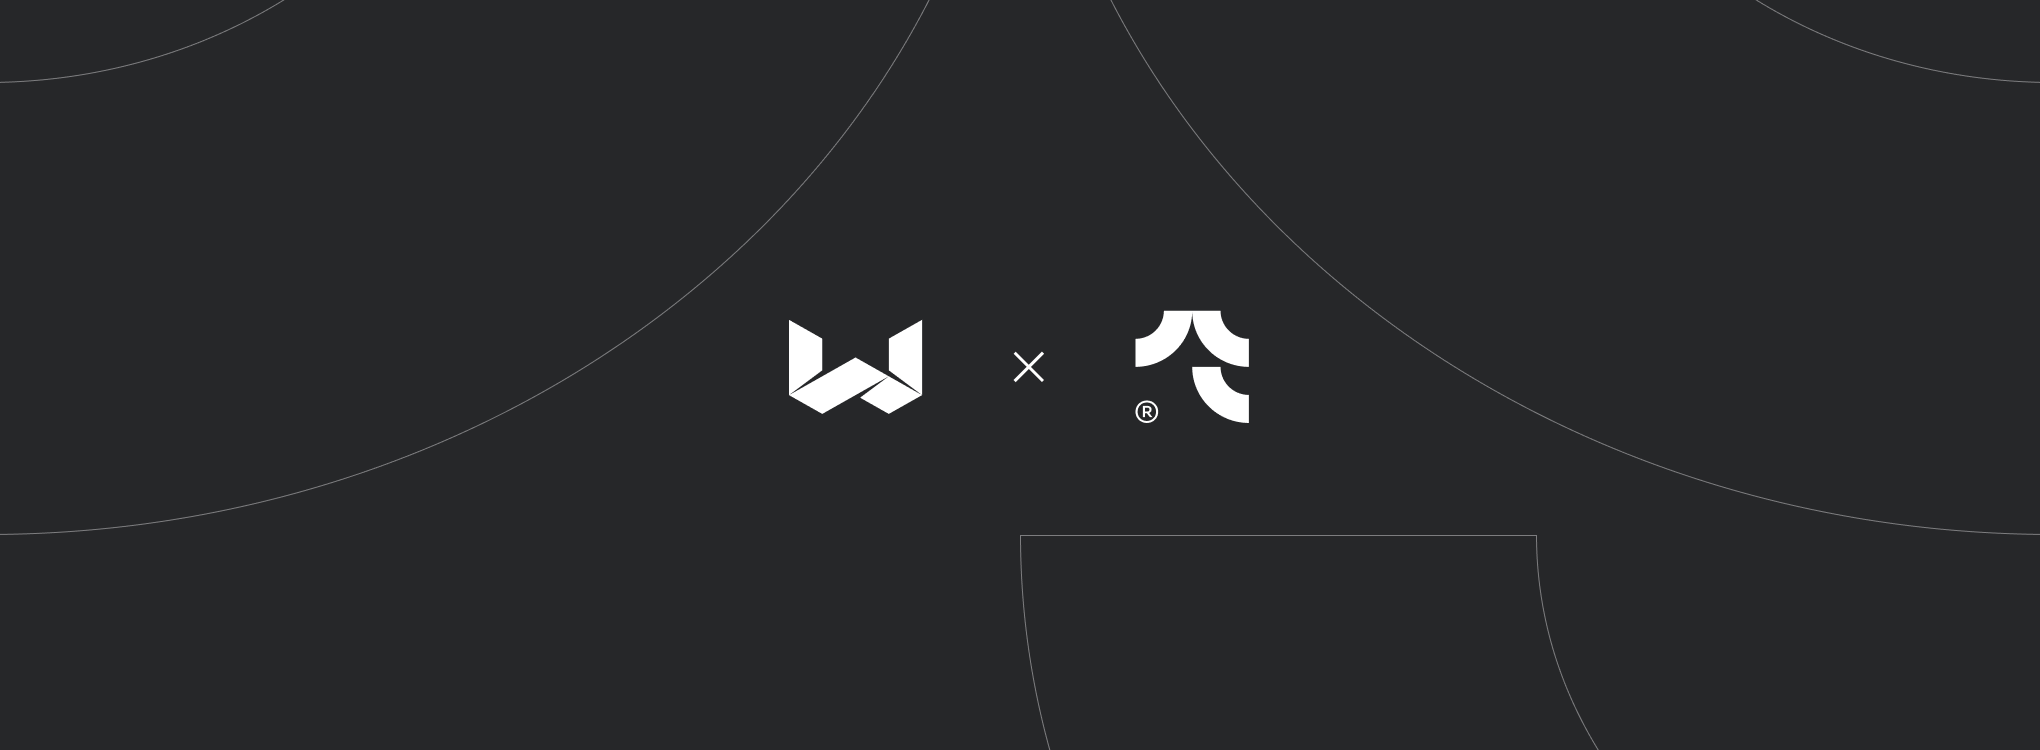 WONDROUS-becomes-Part-of-Parkside-Interactive-Header Image with logos of both companies